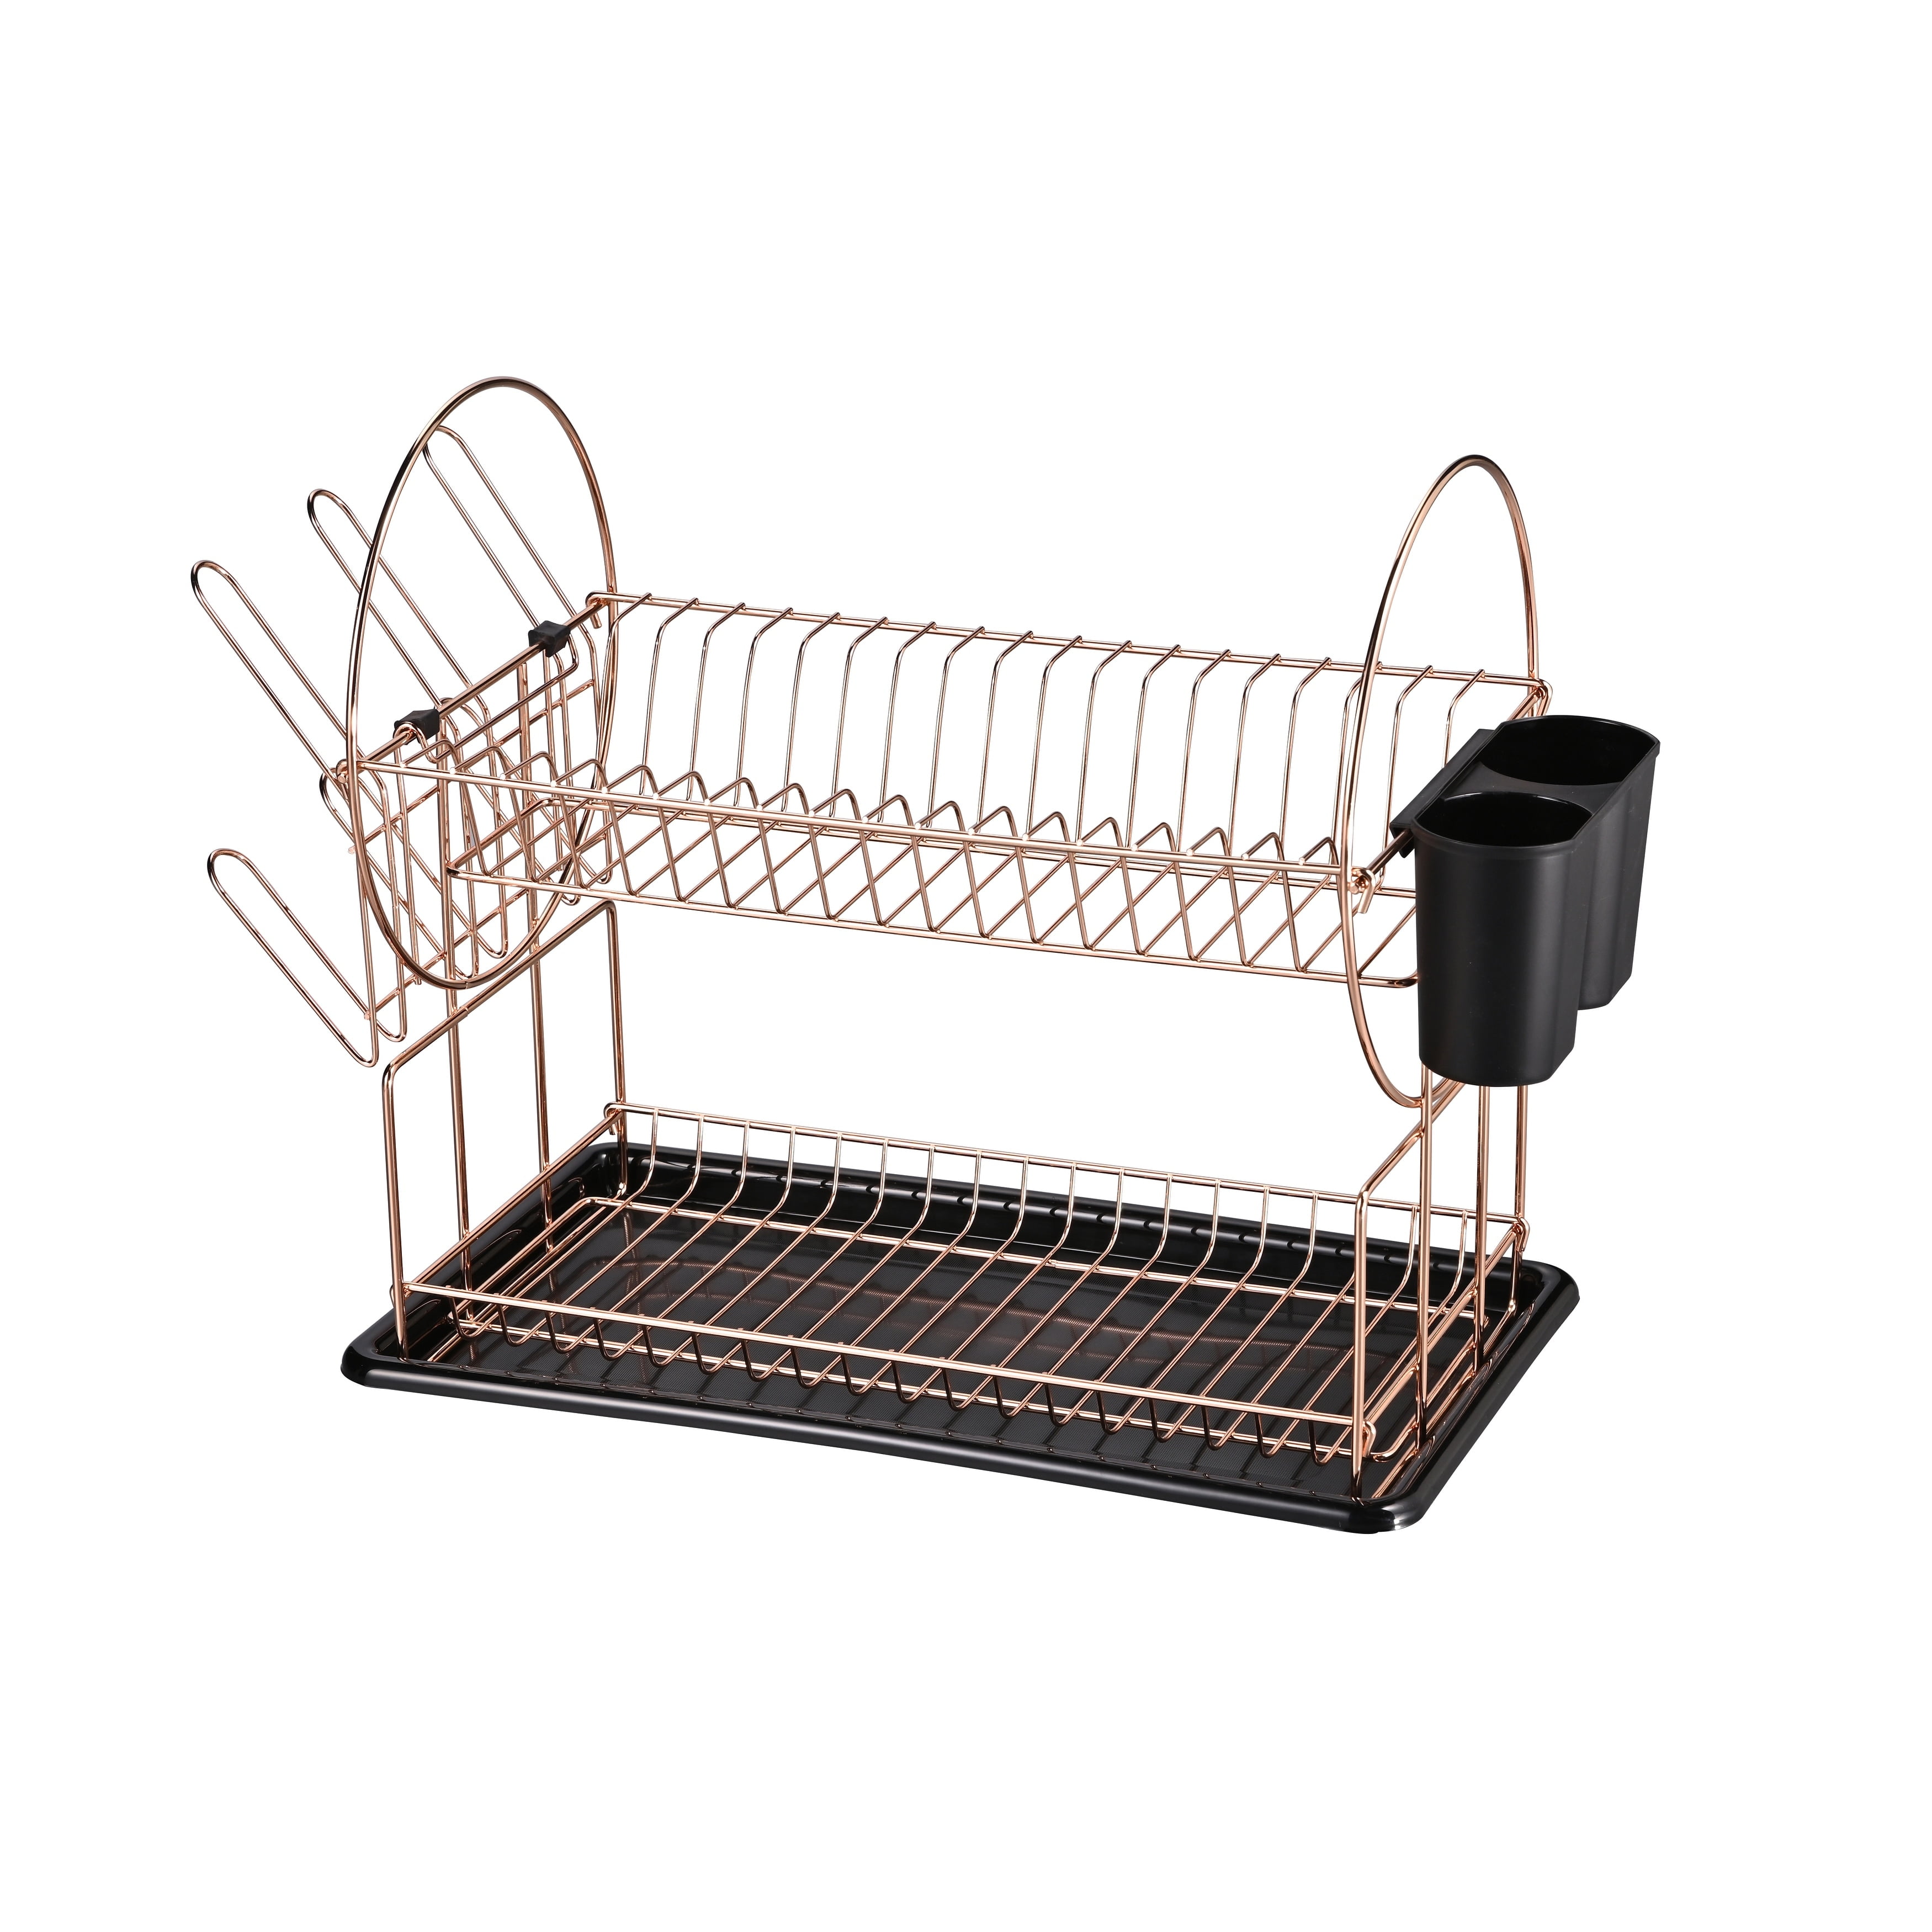 JIALLO SW2134RG Jiallo Stainless Steel 2-Tier dish rack with dripping tray (Rose Gold)